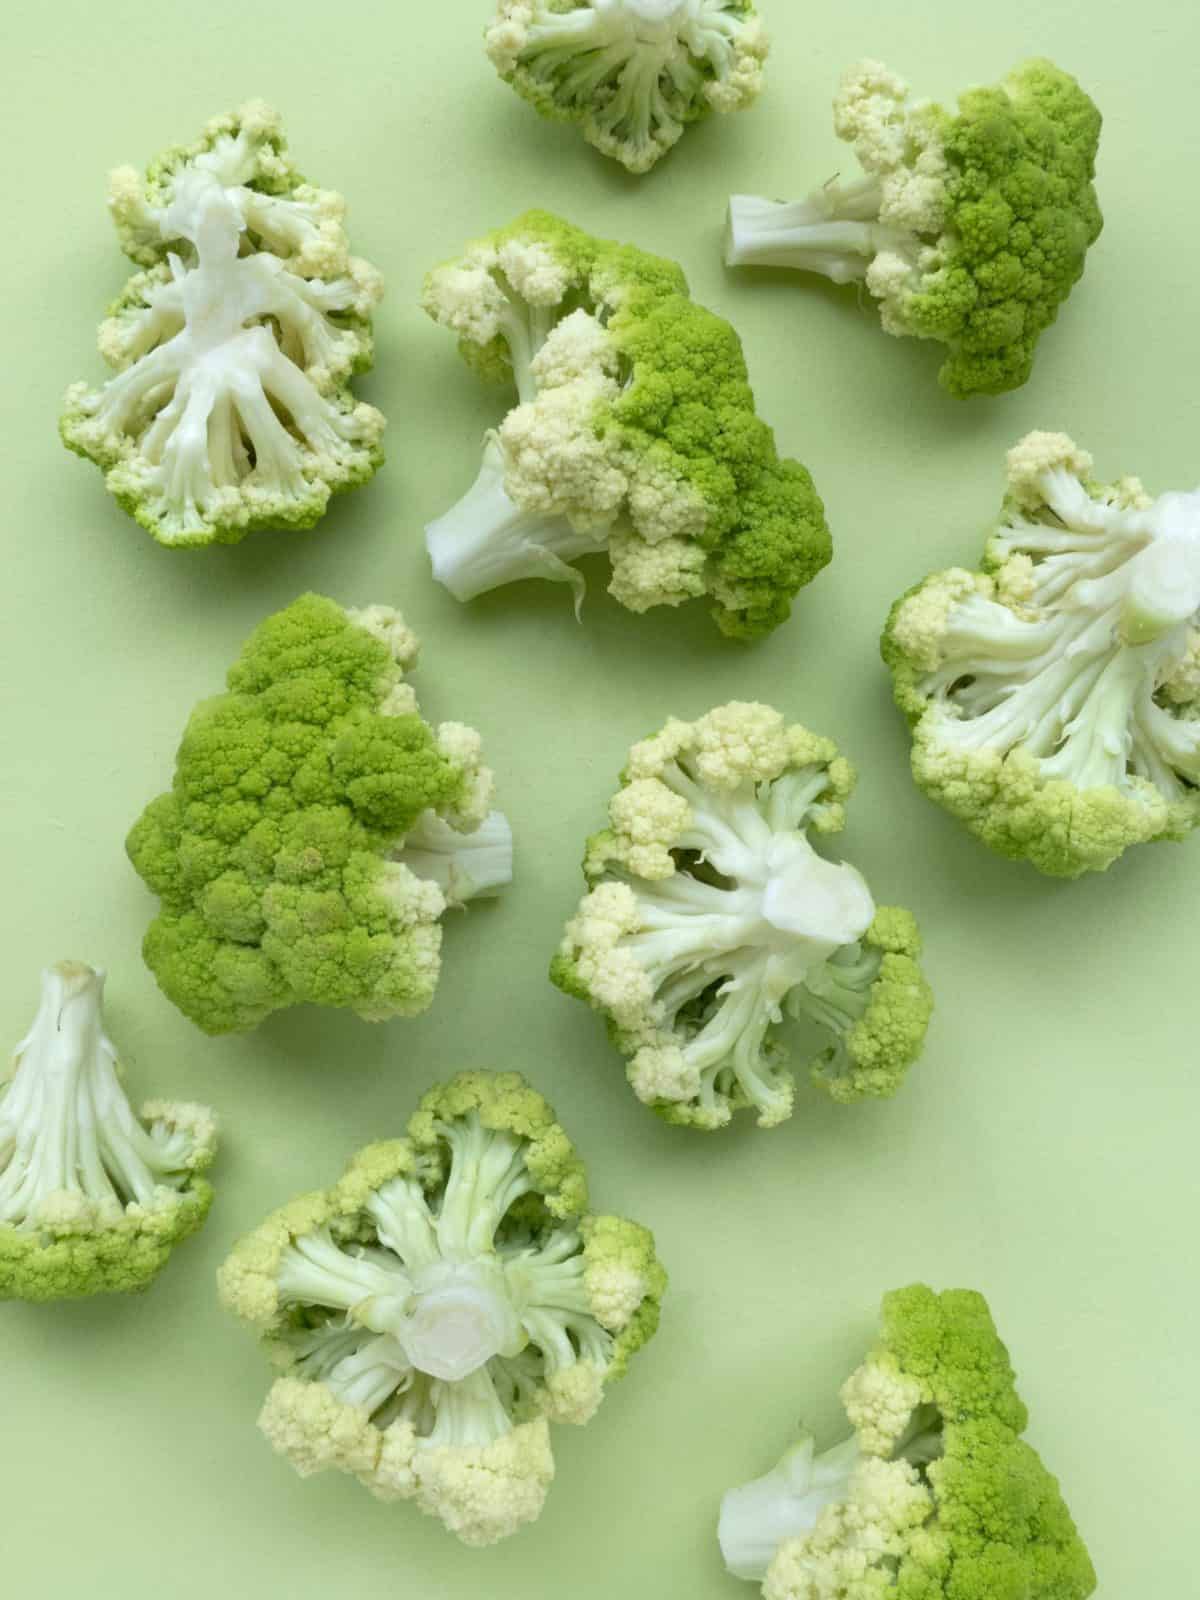 a variety of broccoli florets which should be avoided with hypothyroidism